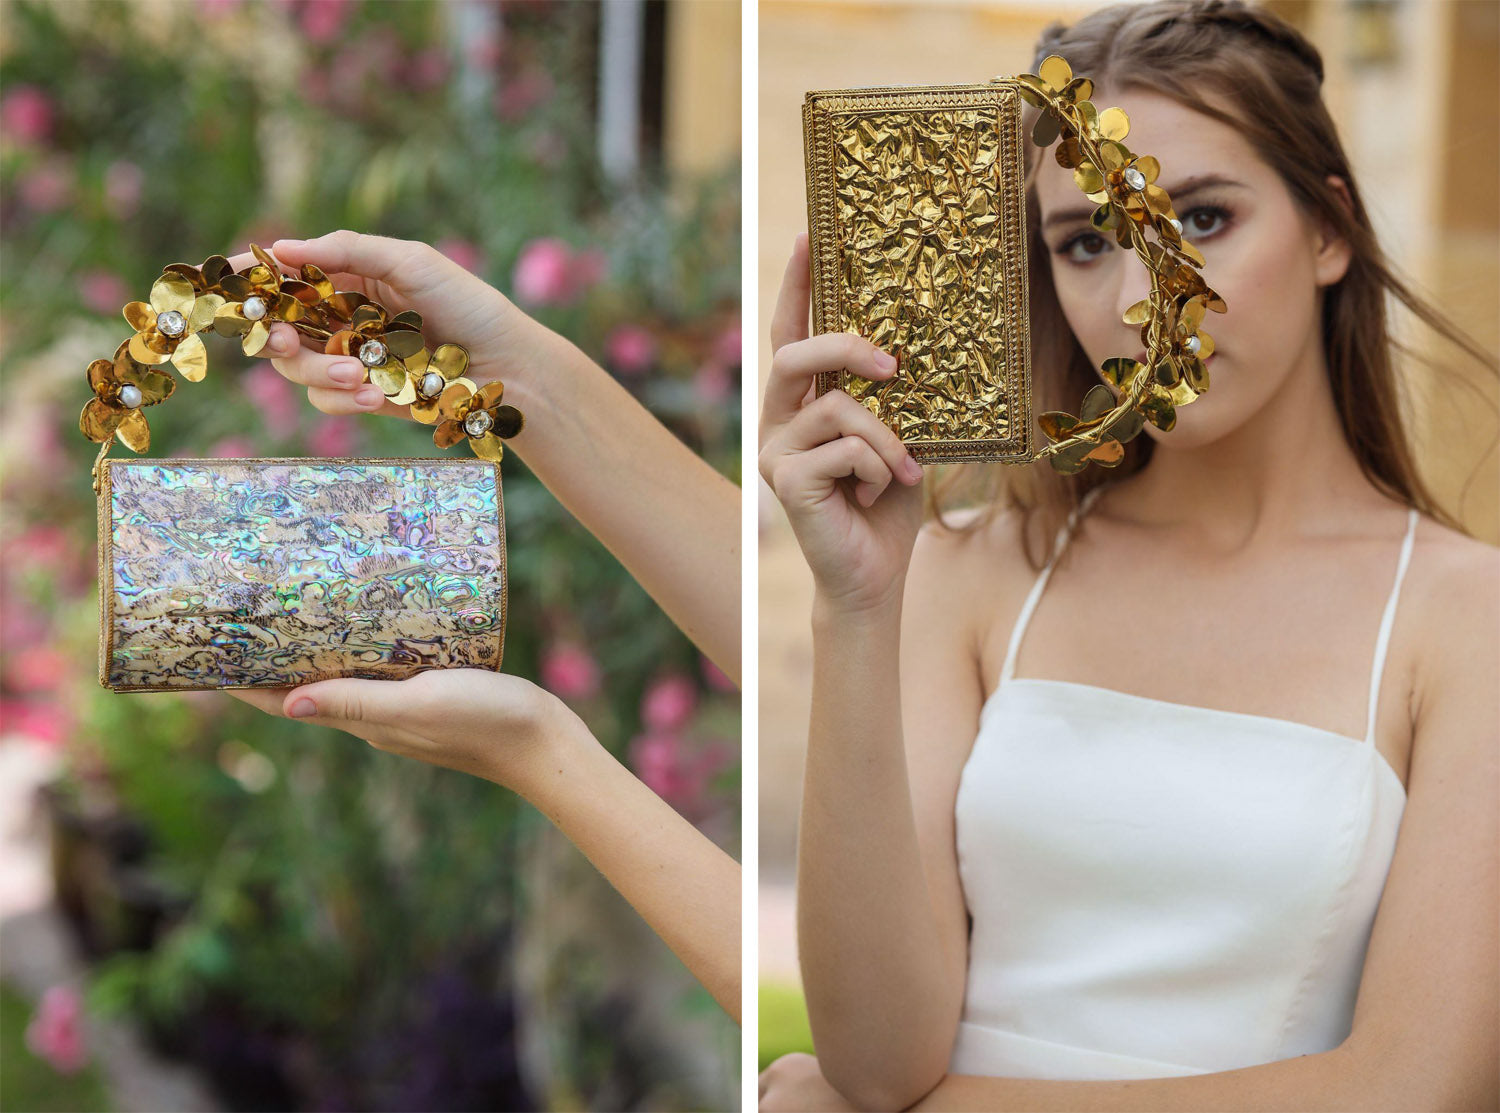 Model holding gold bag with iridescent detail.  